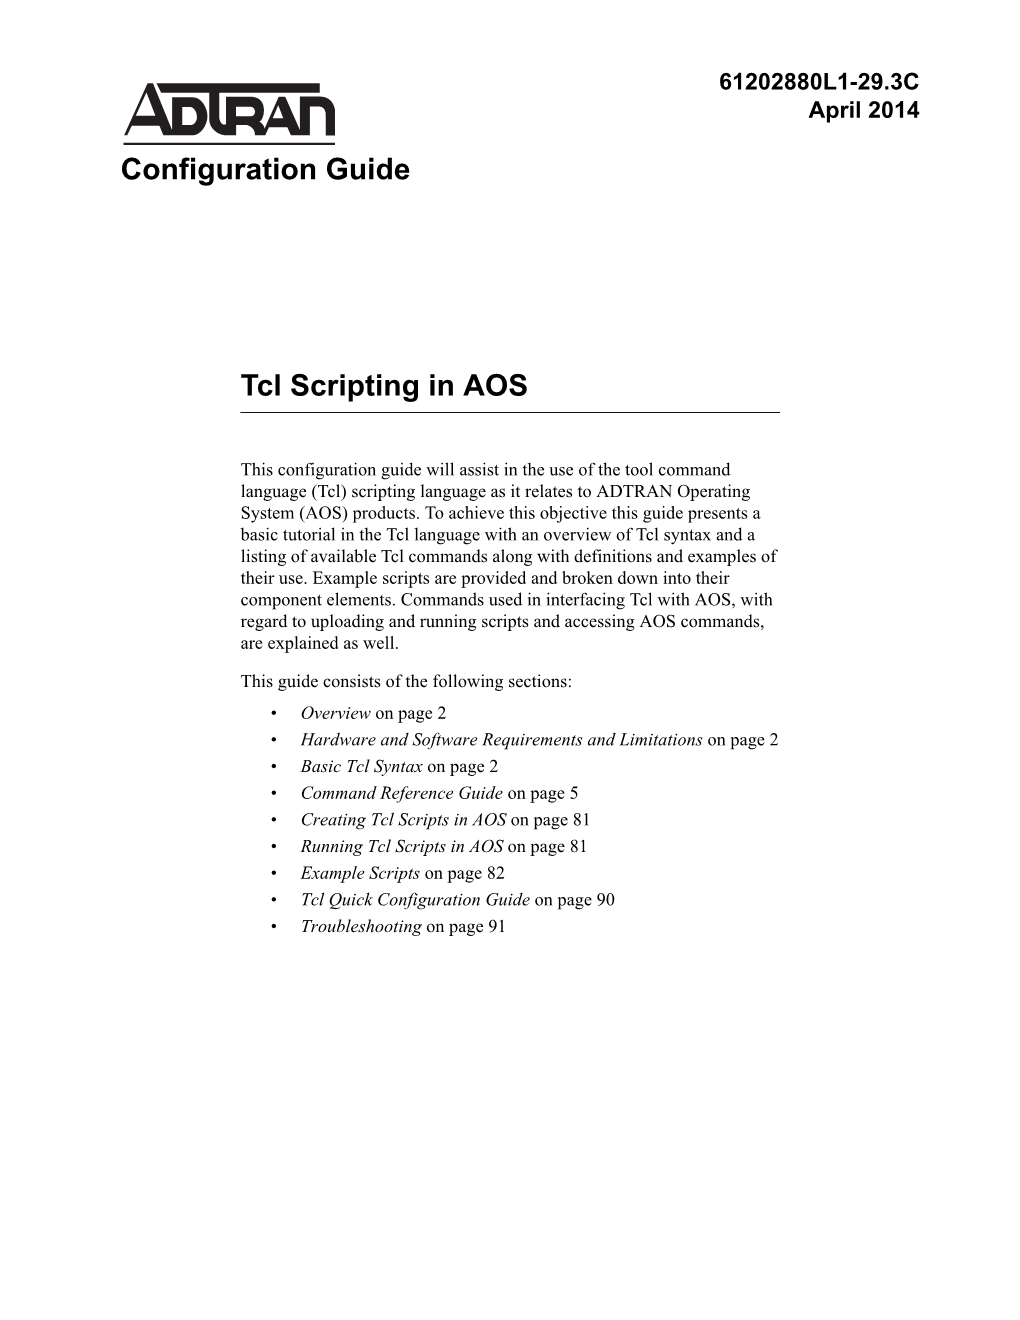 Configuration Guide Tcl Scripting in AOS